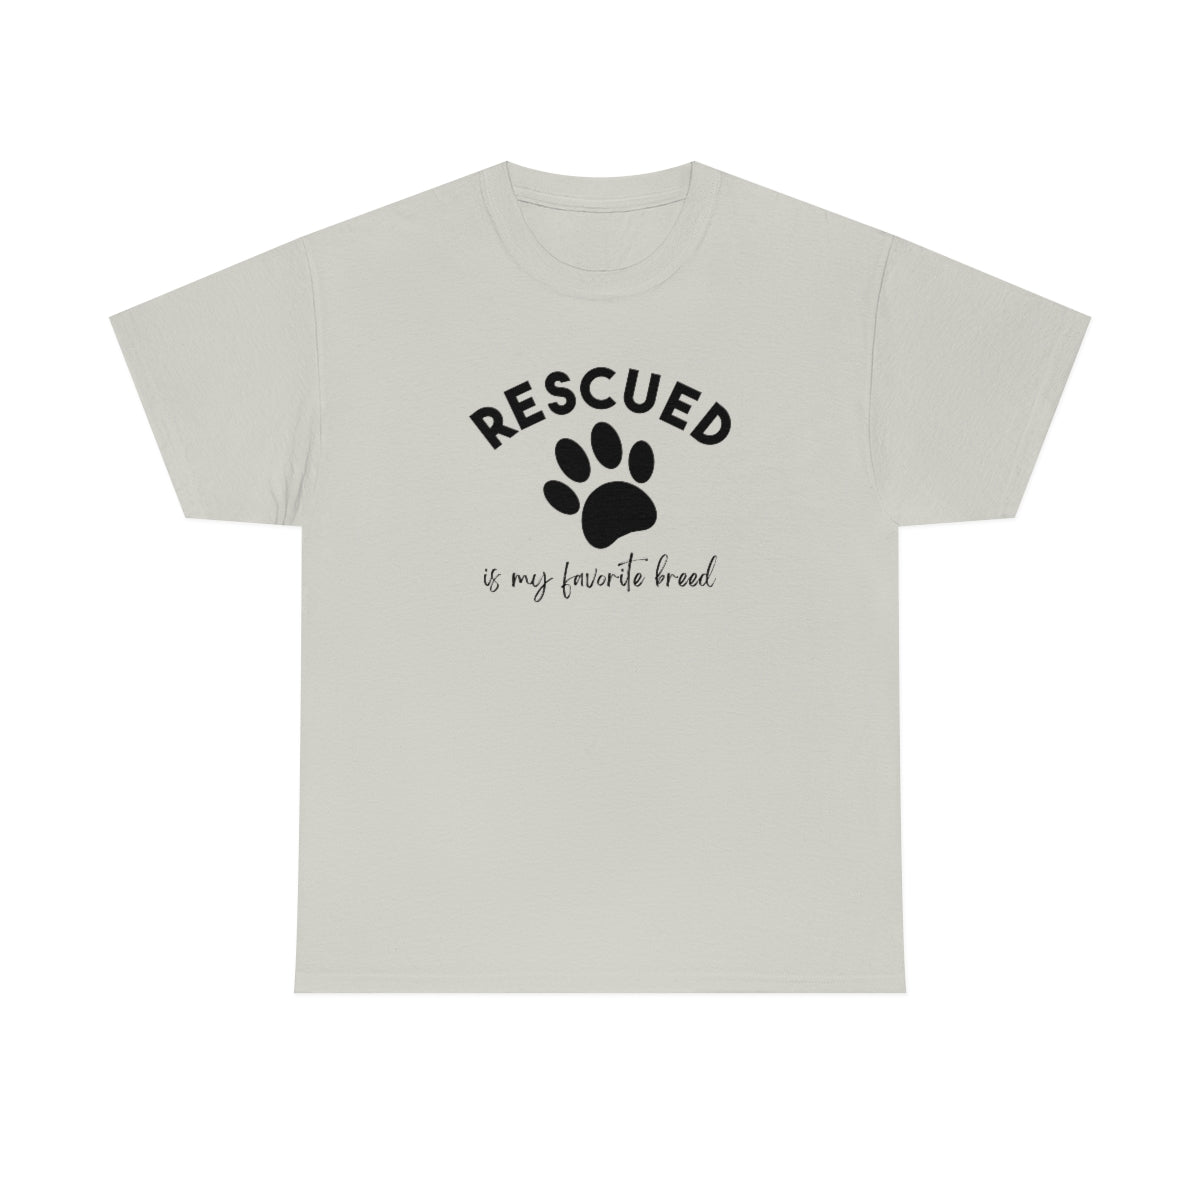 Rescued Is My Favorite Breed Paw | Text Tees - Detezi Designs-25595772363112954410